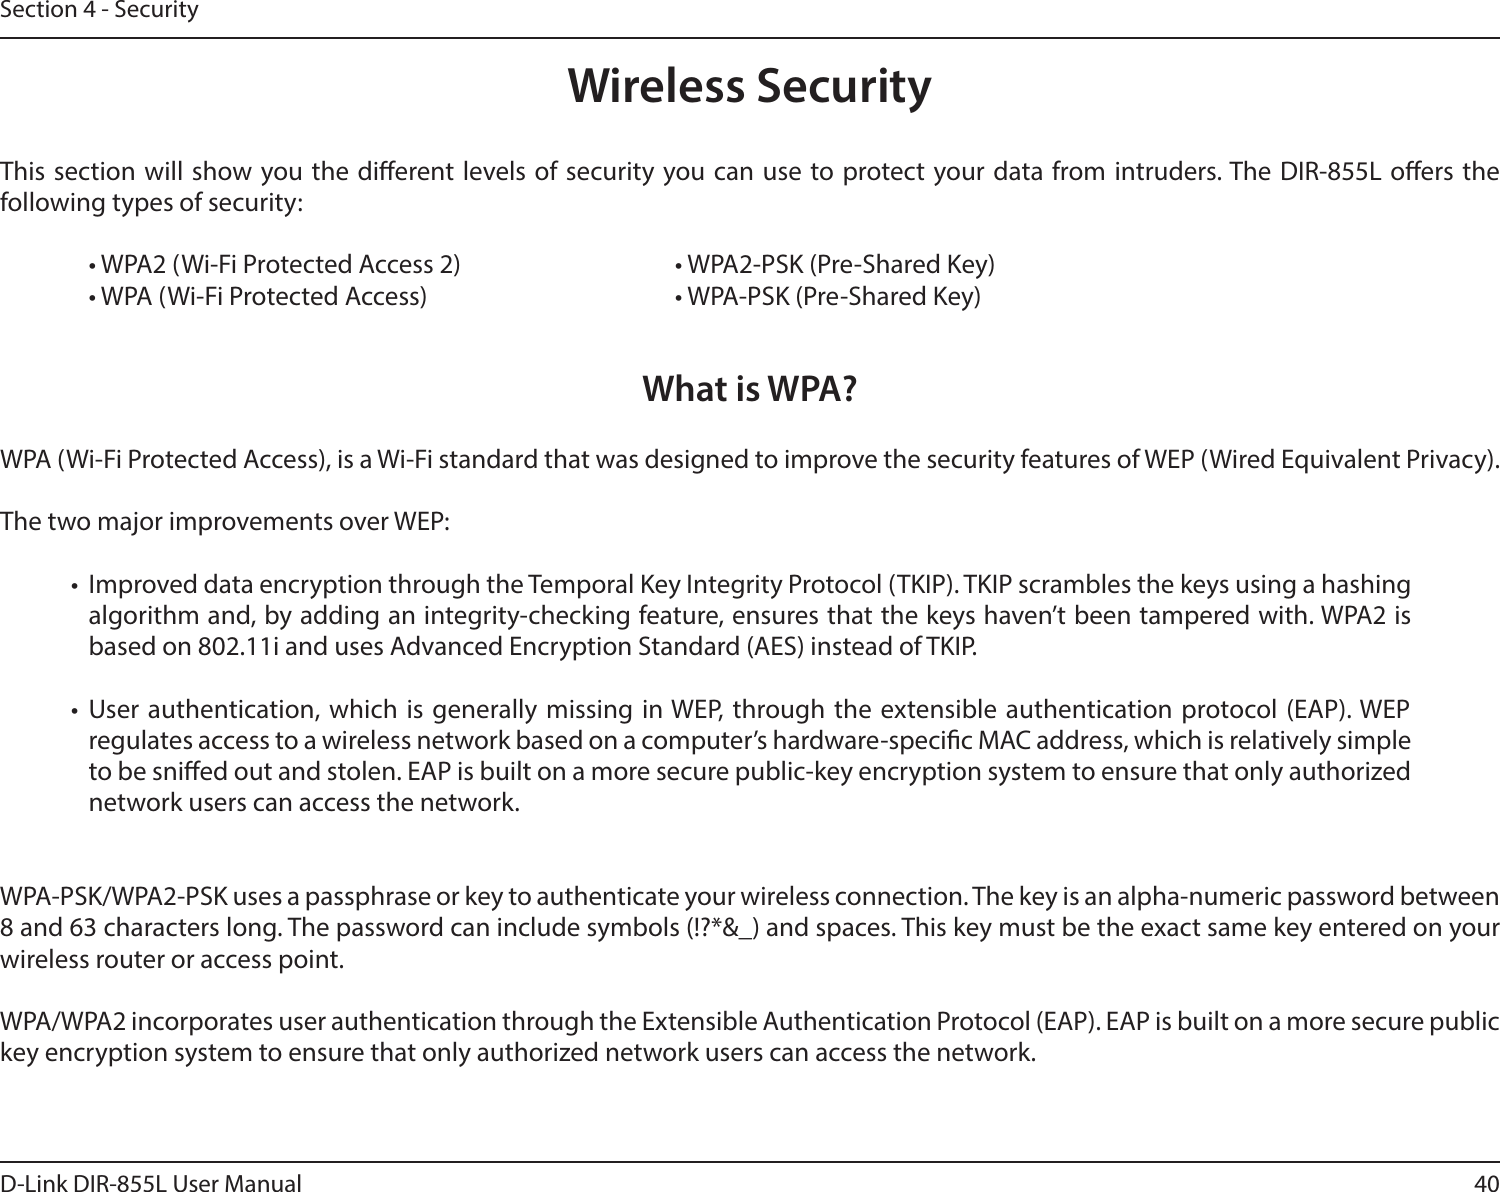 40D-Link DIR-855L User ManualSection 4 - SecurityWireless SecurityThis section will show you the dierent levels of security you can use to protect your data from intruders. The DIR-855L oers the following types of security:  • WPA2 (Wi-Fi Protected Access 2)       • WPA2-PSK (Pre-Shared Key)  • WPA (Wi-Fi Protected Access)        • WPA-PSK (Pre-Shared Key)What is WPA?WPA (Wi-Fi Protected Access), is a Wi-Fi standard that was designed to improve the security features of WEP (Wired Equivalent Privacy).  The two major improvements over WEP: •  Improved data encryption through the Temporal Key Integrity Protocol (TKIP). TKIP scrambles the keys using a hashing algorithm and, by adding an integrity-checking feature, ensures that the keys haven’t been tampered with. WPA2 is based on 802.11i and uses Advanced Encryption Standard (AES) instead of TKIP.•  User authentication, which is  generally missing  in WEP,  through the extensible authentication protocol (EAP). WEP regulates access to a wireless network based on a computer’s hardware-specic MAC address, which is relatively simple to be snied out and stolen. EAP is built on a more secure public-key encryption system to ensure that only authorized network users can access the network.WPA-PSK/WPA2-PSK uses a passphrase or key to authenticate your wireless connection. The key is an alpha-numeric password between 8 and 63 characters long. The password can include symbols (!?*&amp;_) and spaces. This key must be the exact same key entered on your wireless router or access point.WPA/WPA2 incorporates user authentication through the Extensible Authentication Protocol (EAP). EAP is built on a more secure public key encryption system to ensure that only authorized network users can access the network.